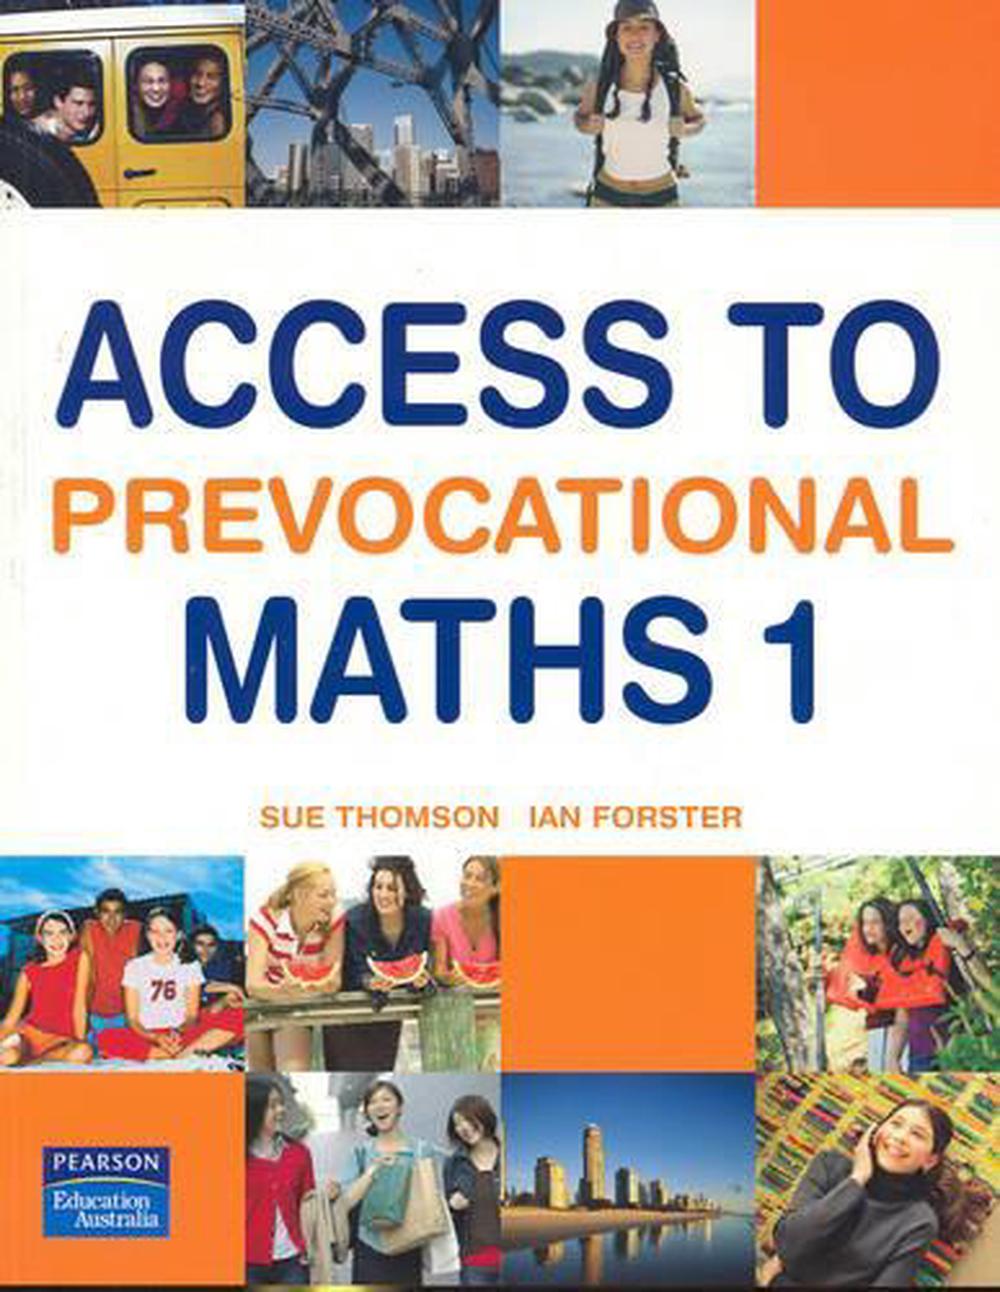 access-to-prevocational-maths-2-pdf